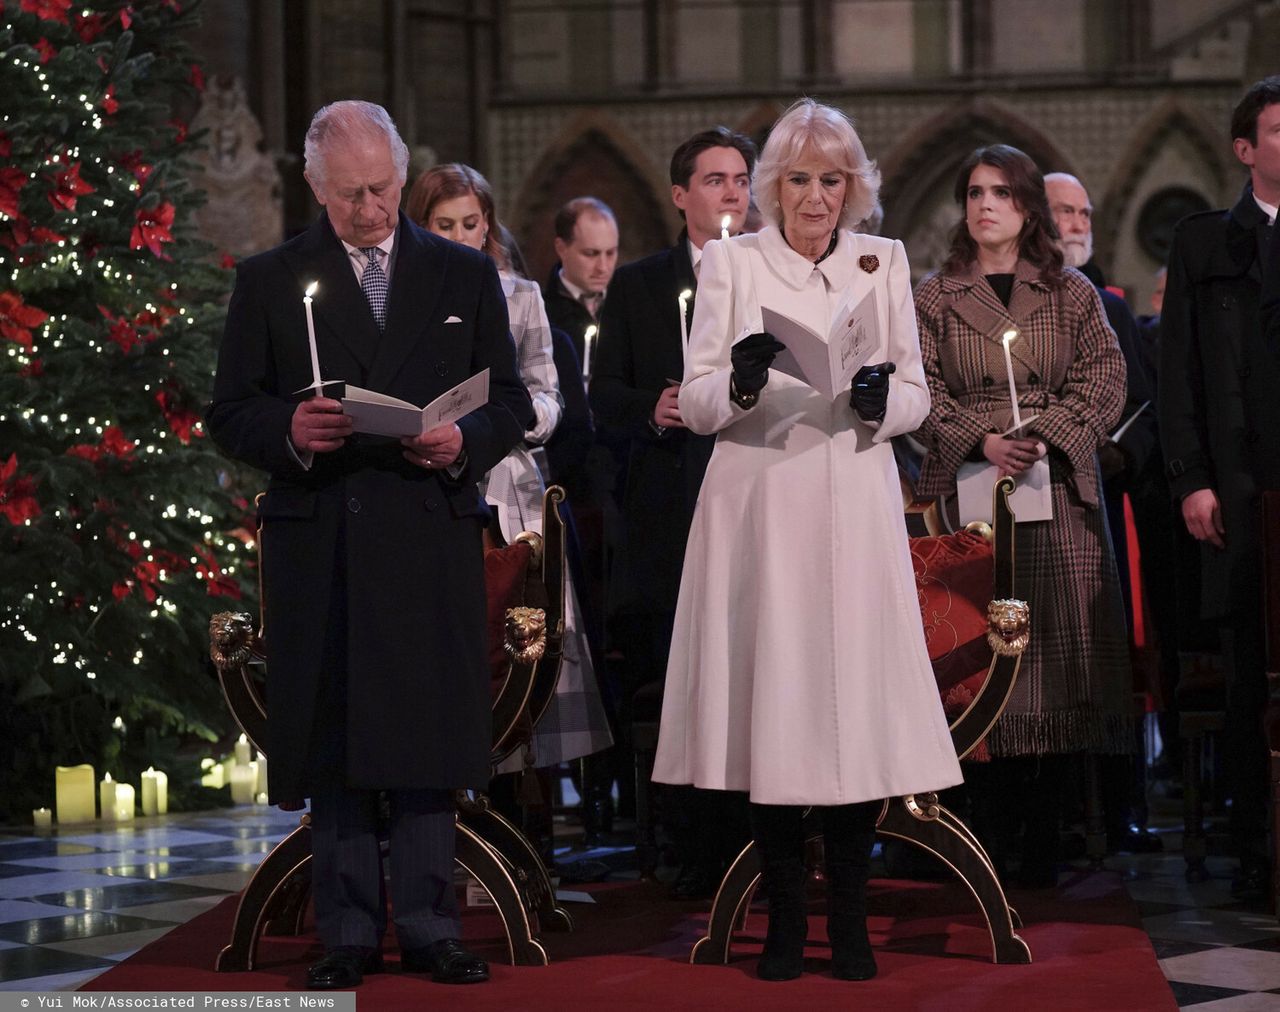 Britain King Charles III and Camilla, the Queen Consort, during the 'Together at Christmas' Carol Service at Westminster Abbey in London Saturday, Dec. 24, 2022. (Yui Mok/Pool via AP)